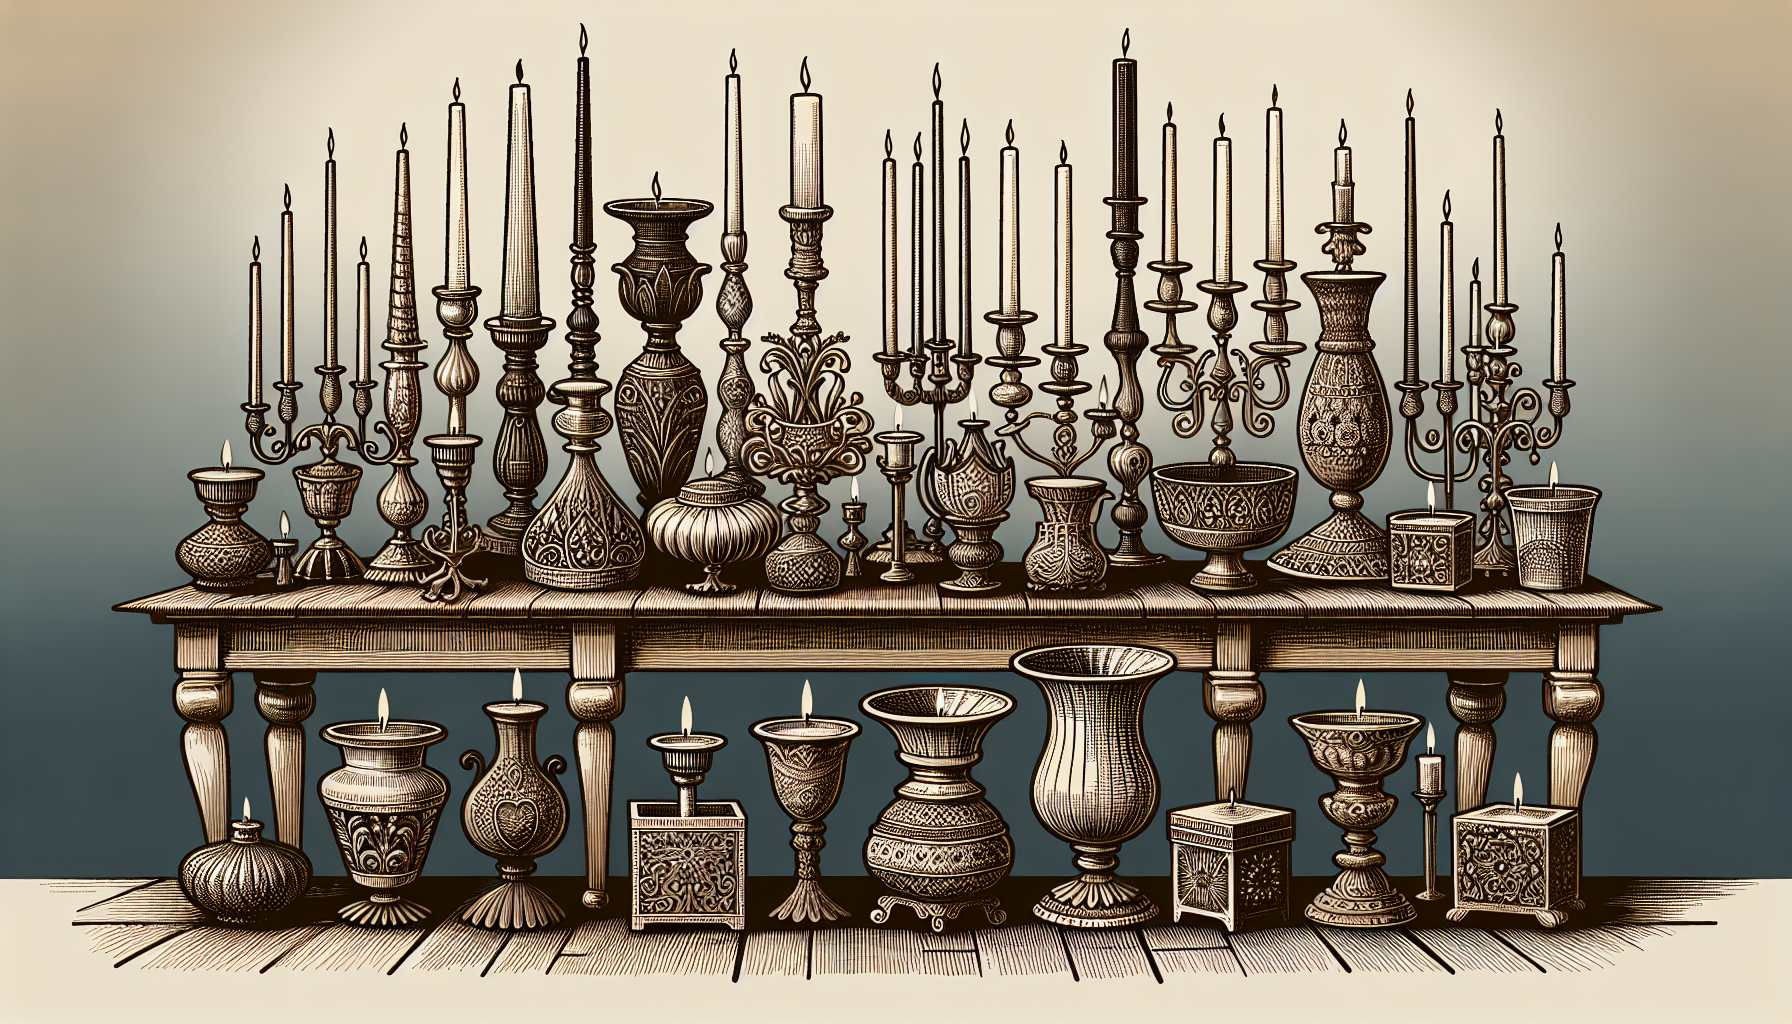 A variety of candle holders displayed on a table